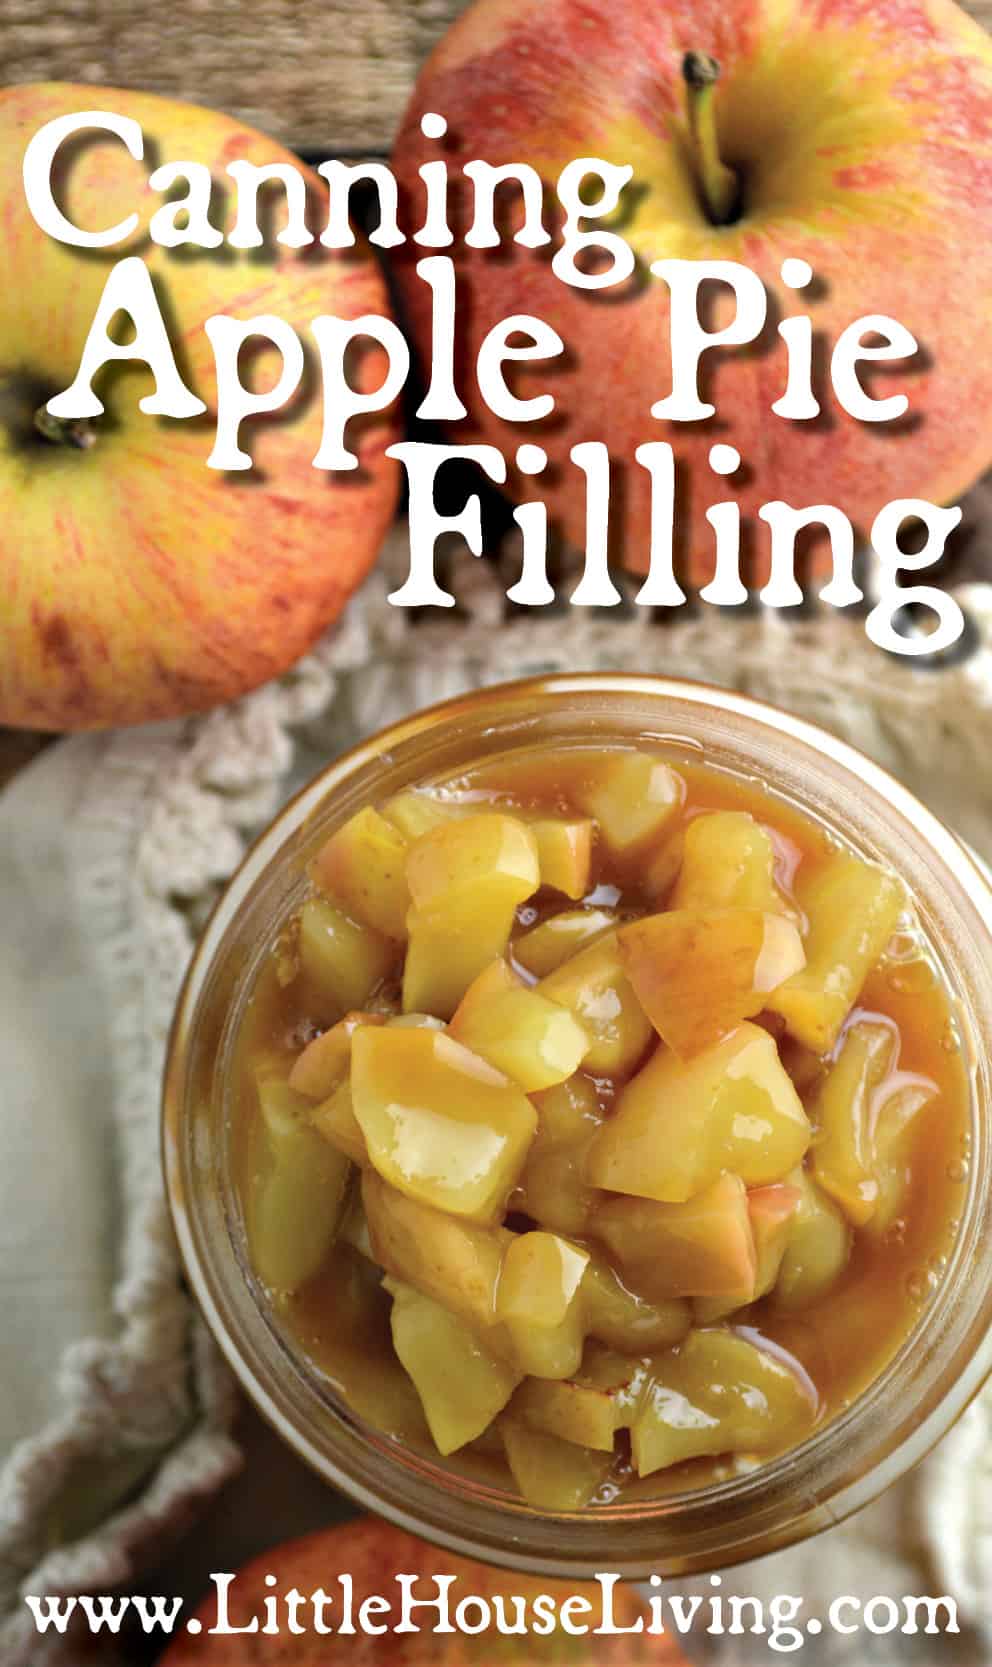 Make the most of the fall's apples by canning apple pie filling for delicious apple desserts all winter long! #canning #apples #fallrecipe #applepiefilling #canningapples